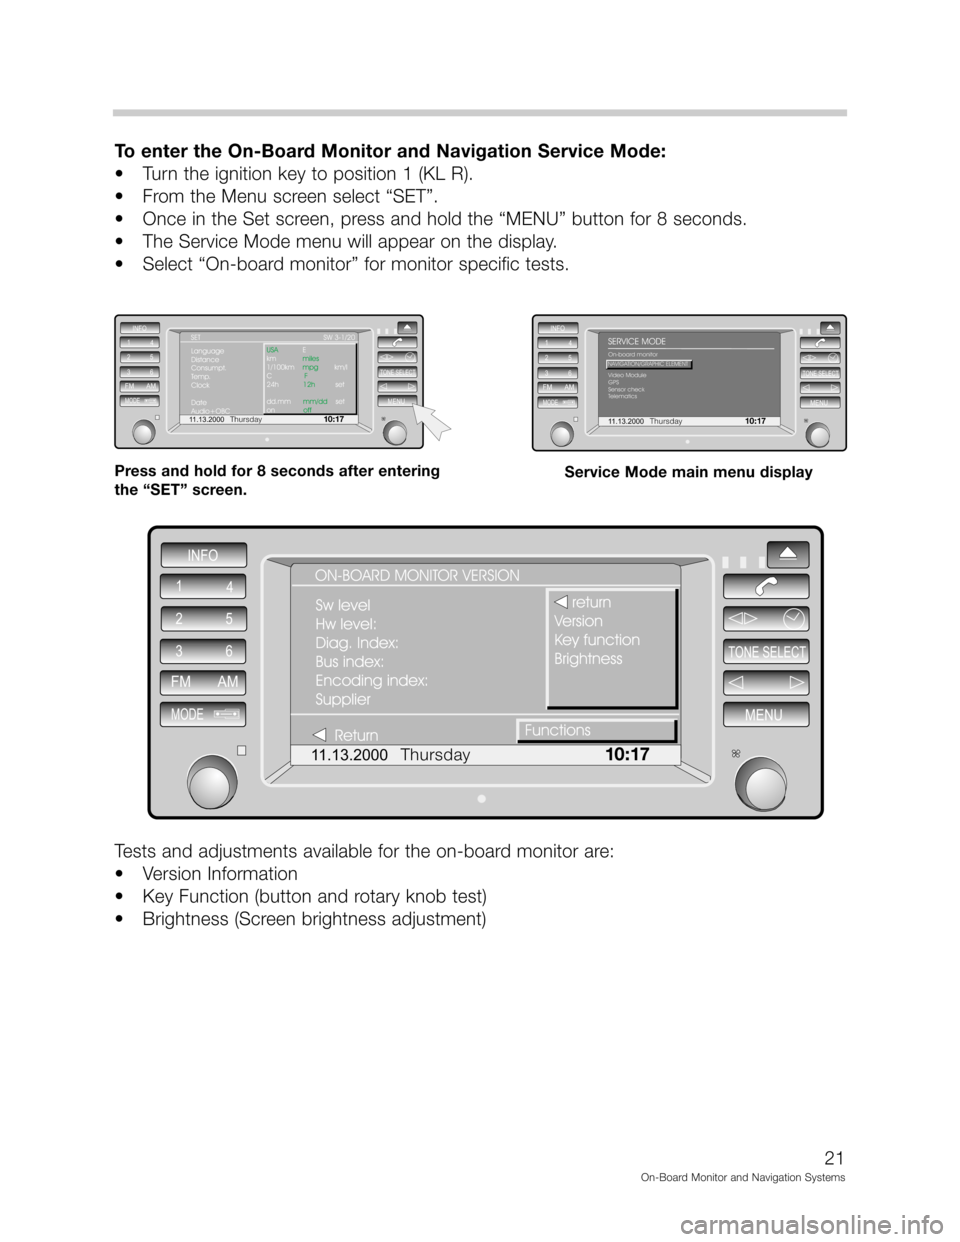 BMW 5 SERIES 2000 E39 On Board Monitor System Workshop Manual *



"&
(	
!&!"	! "!", 1" !, 	
 #


9

*7$3 8
 <	

?(#@
 

(